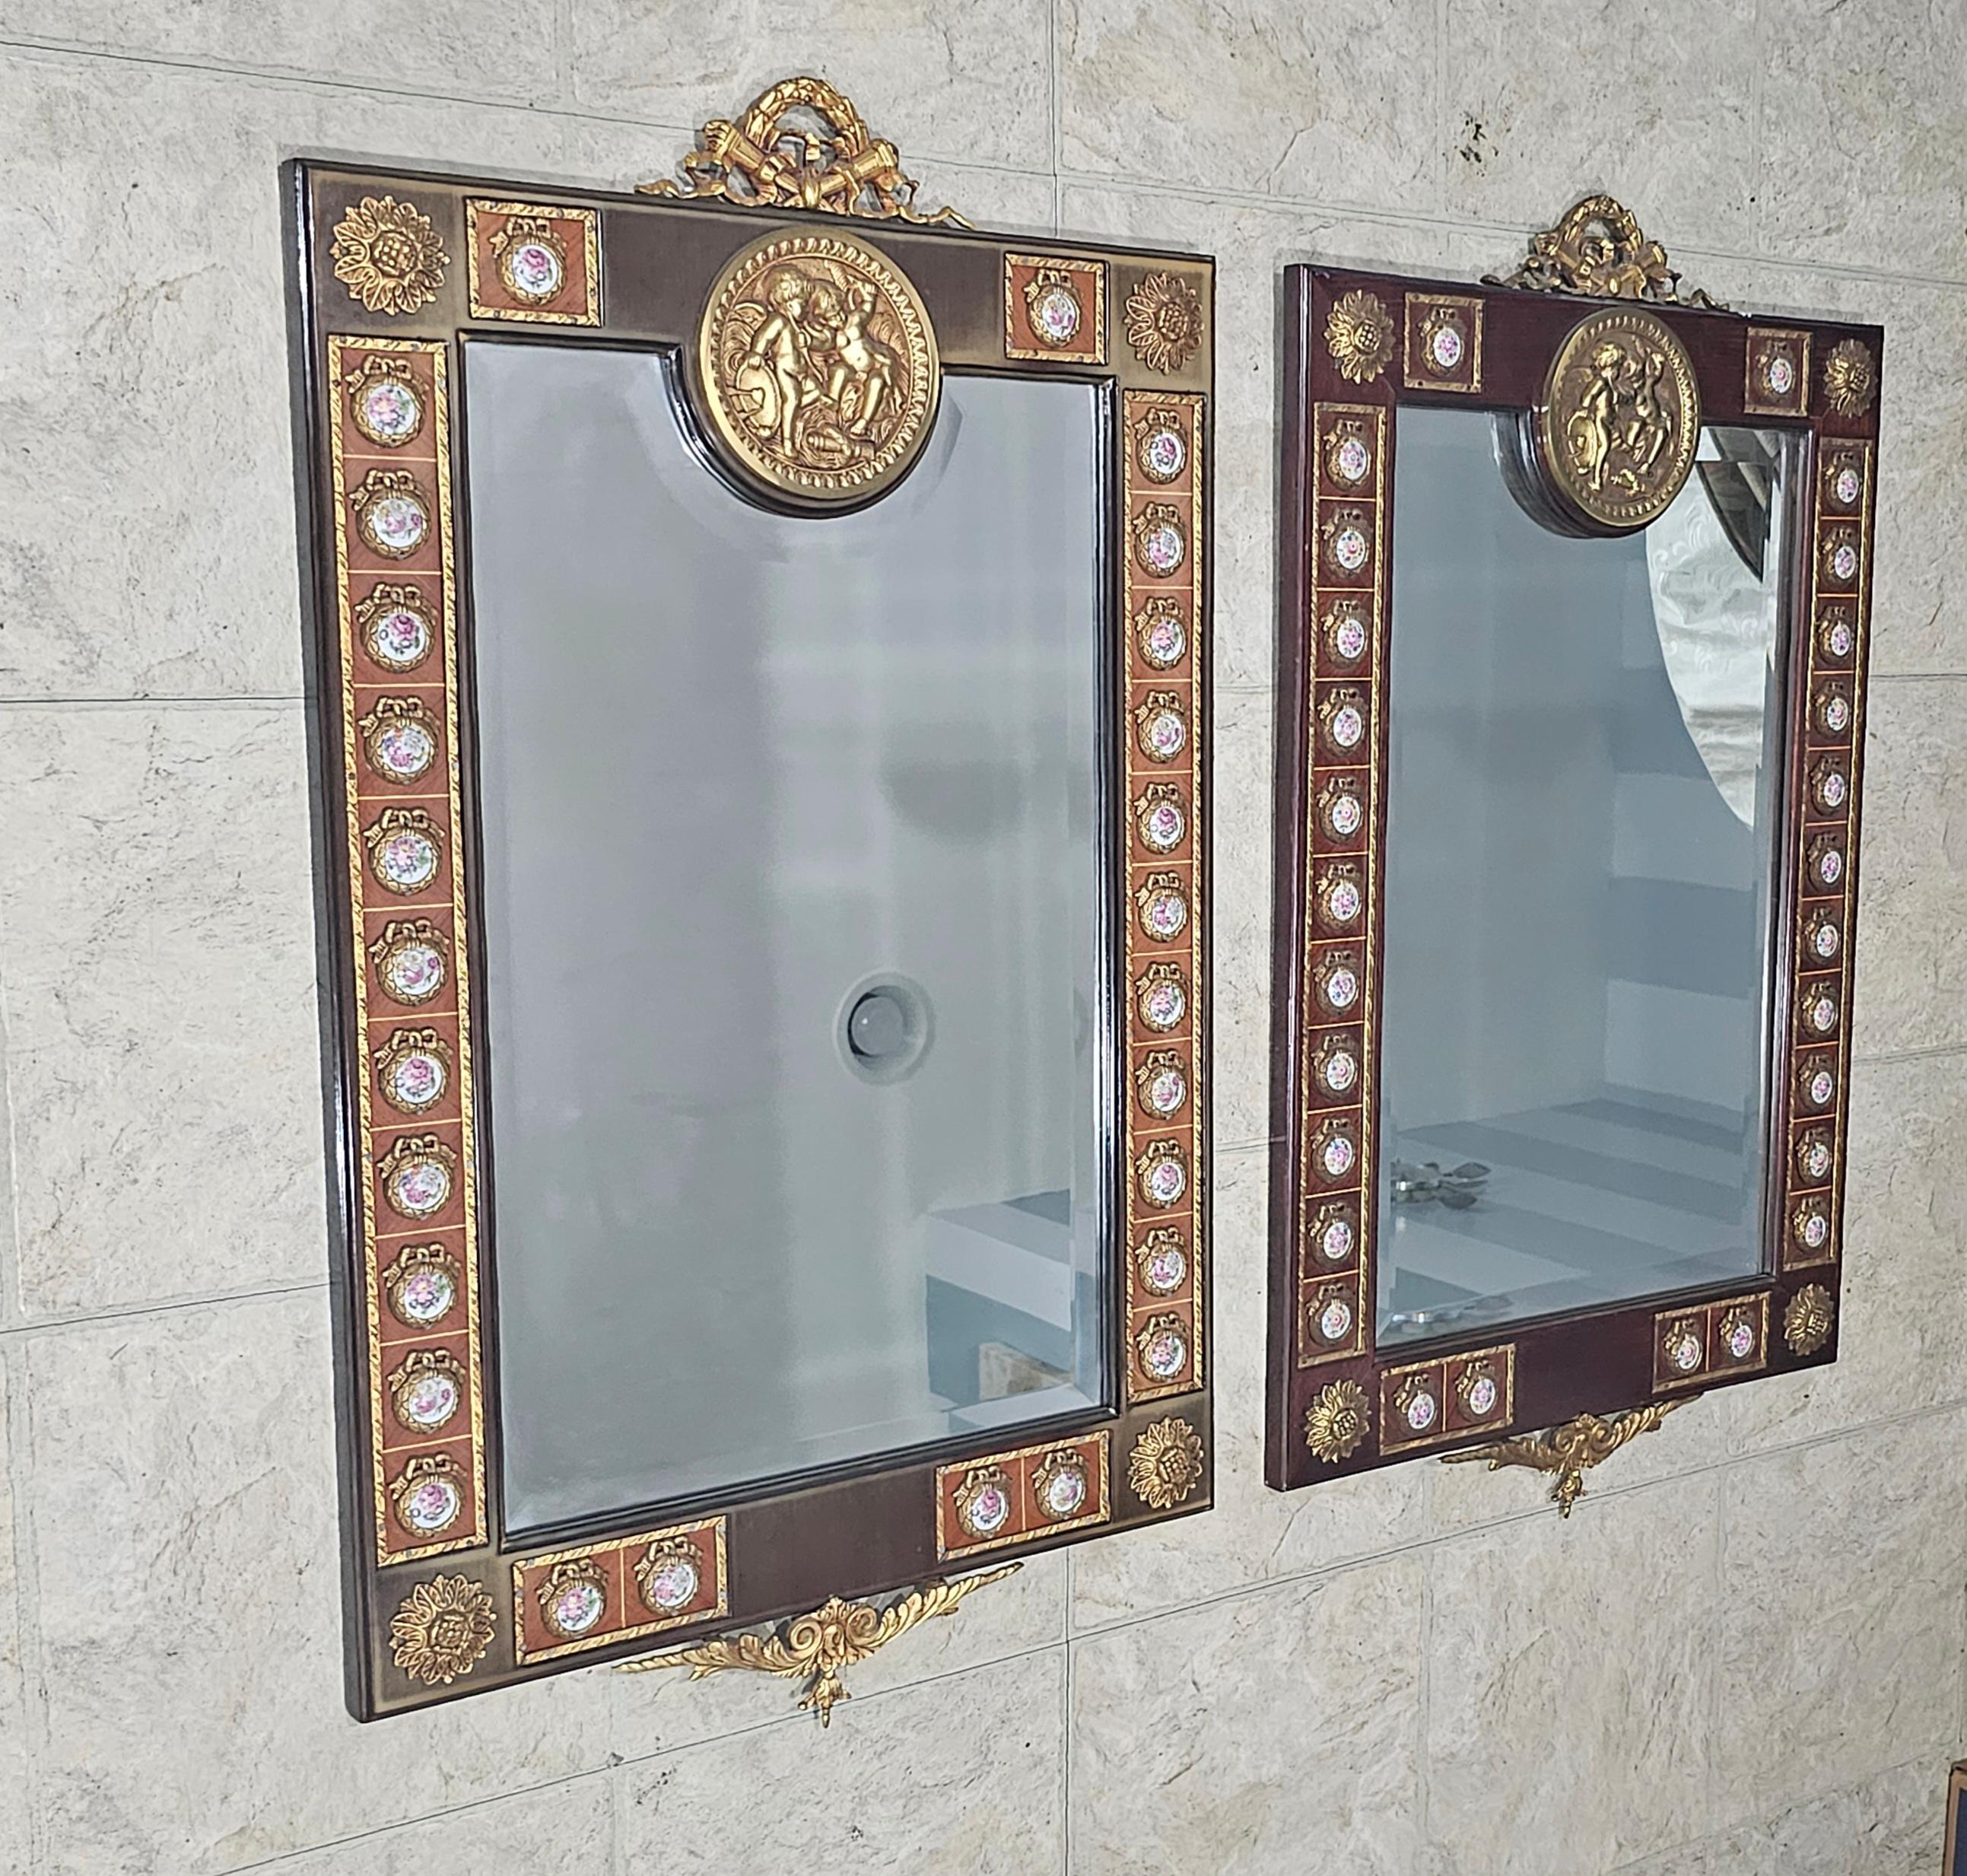 20th Century Mariner Louis XV Marquetry Ormolu & Porcelain Inset Mirrors, a Pair For Sale 8